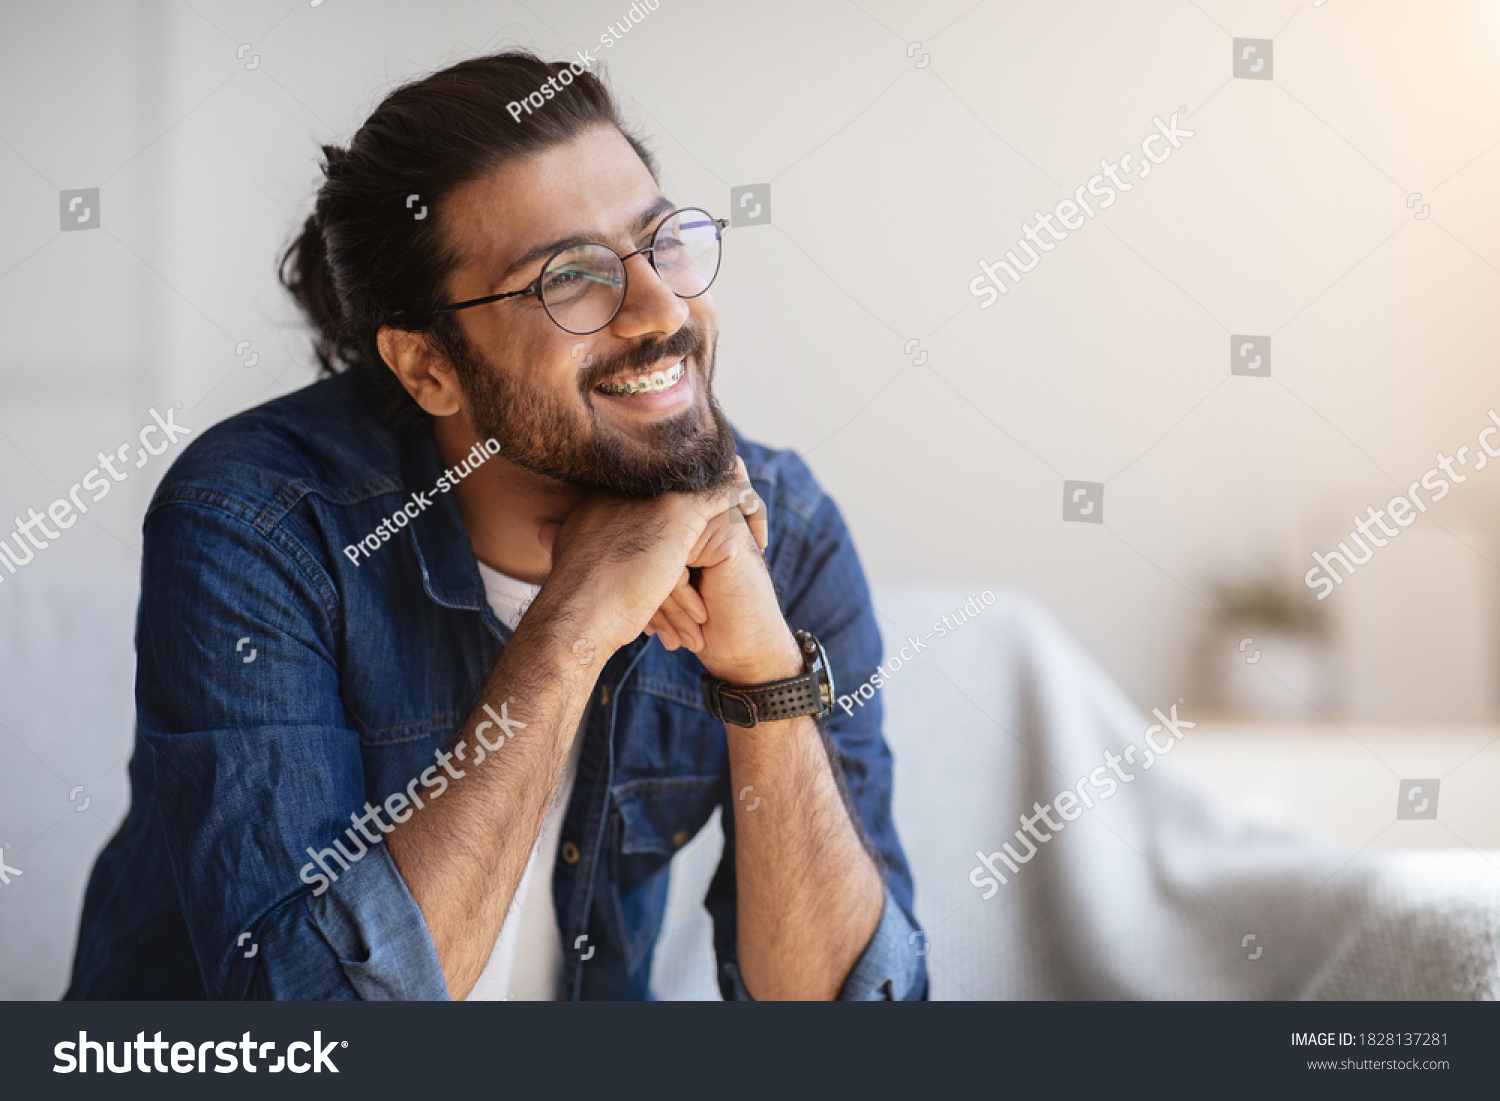 Portrait Of Smiling Indian Man With Eyeglasses And Braces In Home Interior, Handsome Pensive Western Guy Daydreaming And Looking Away, Thinking About Something, Selective Focus With Copy Space #1828137281